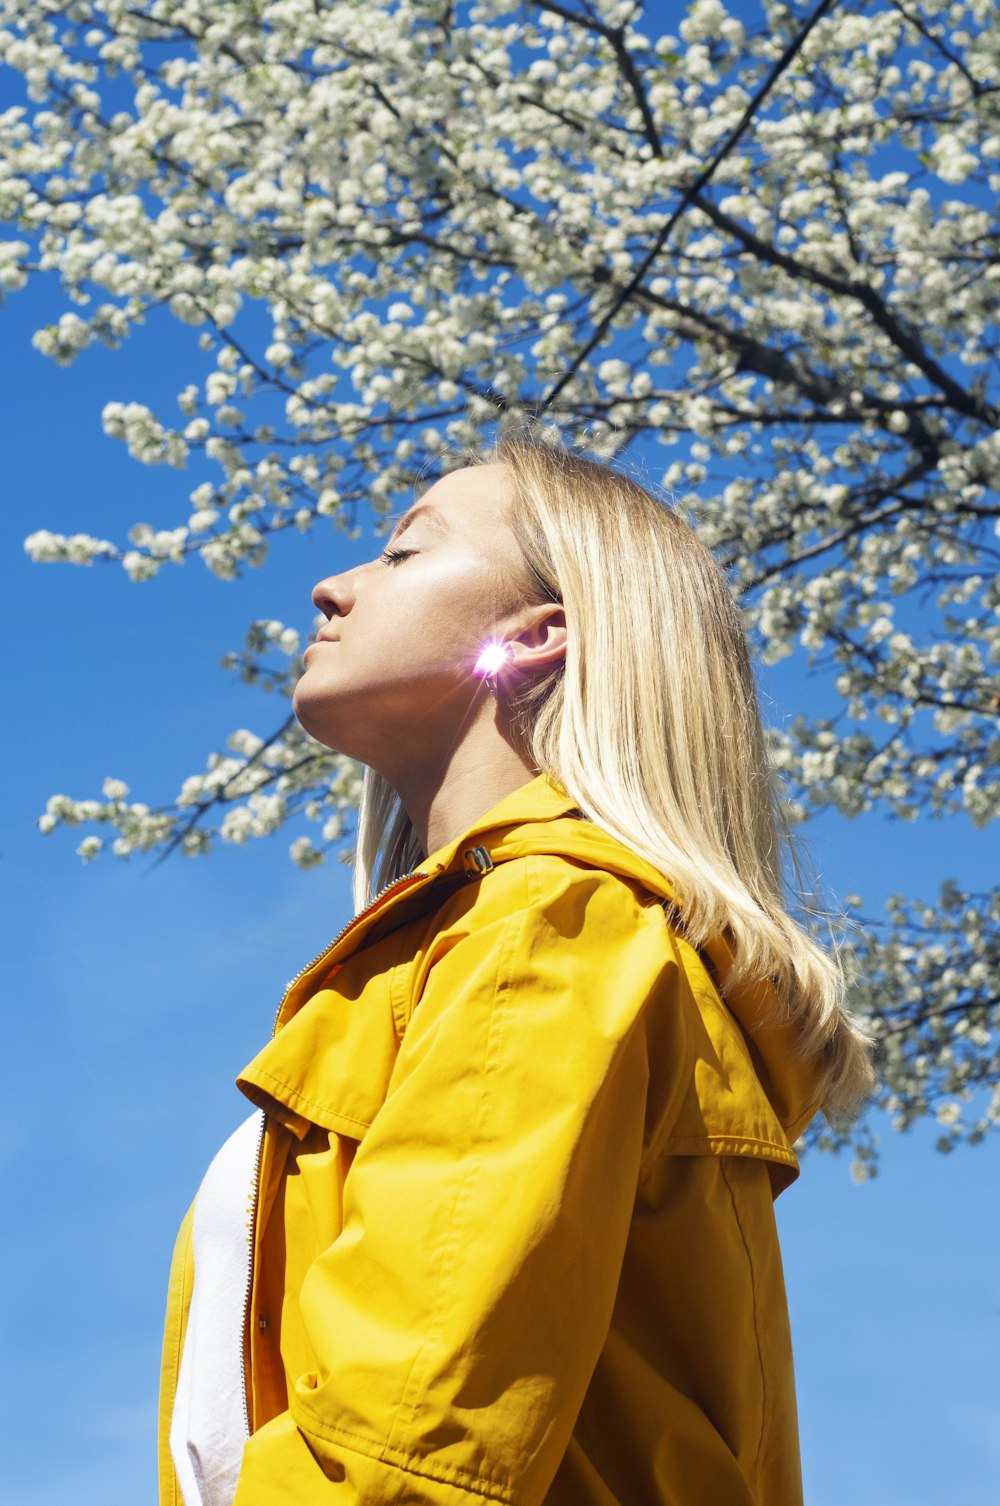 woman in yellow jacket under white and blue cloudy sky during daytime